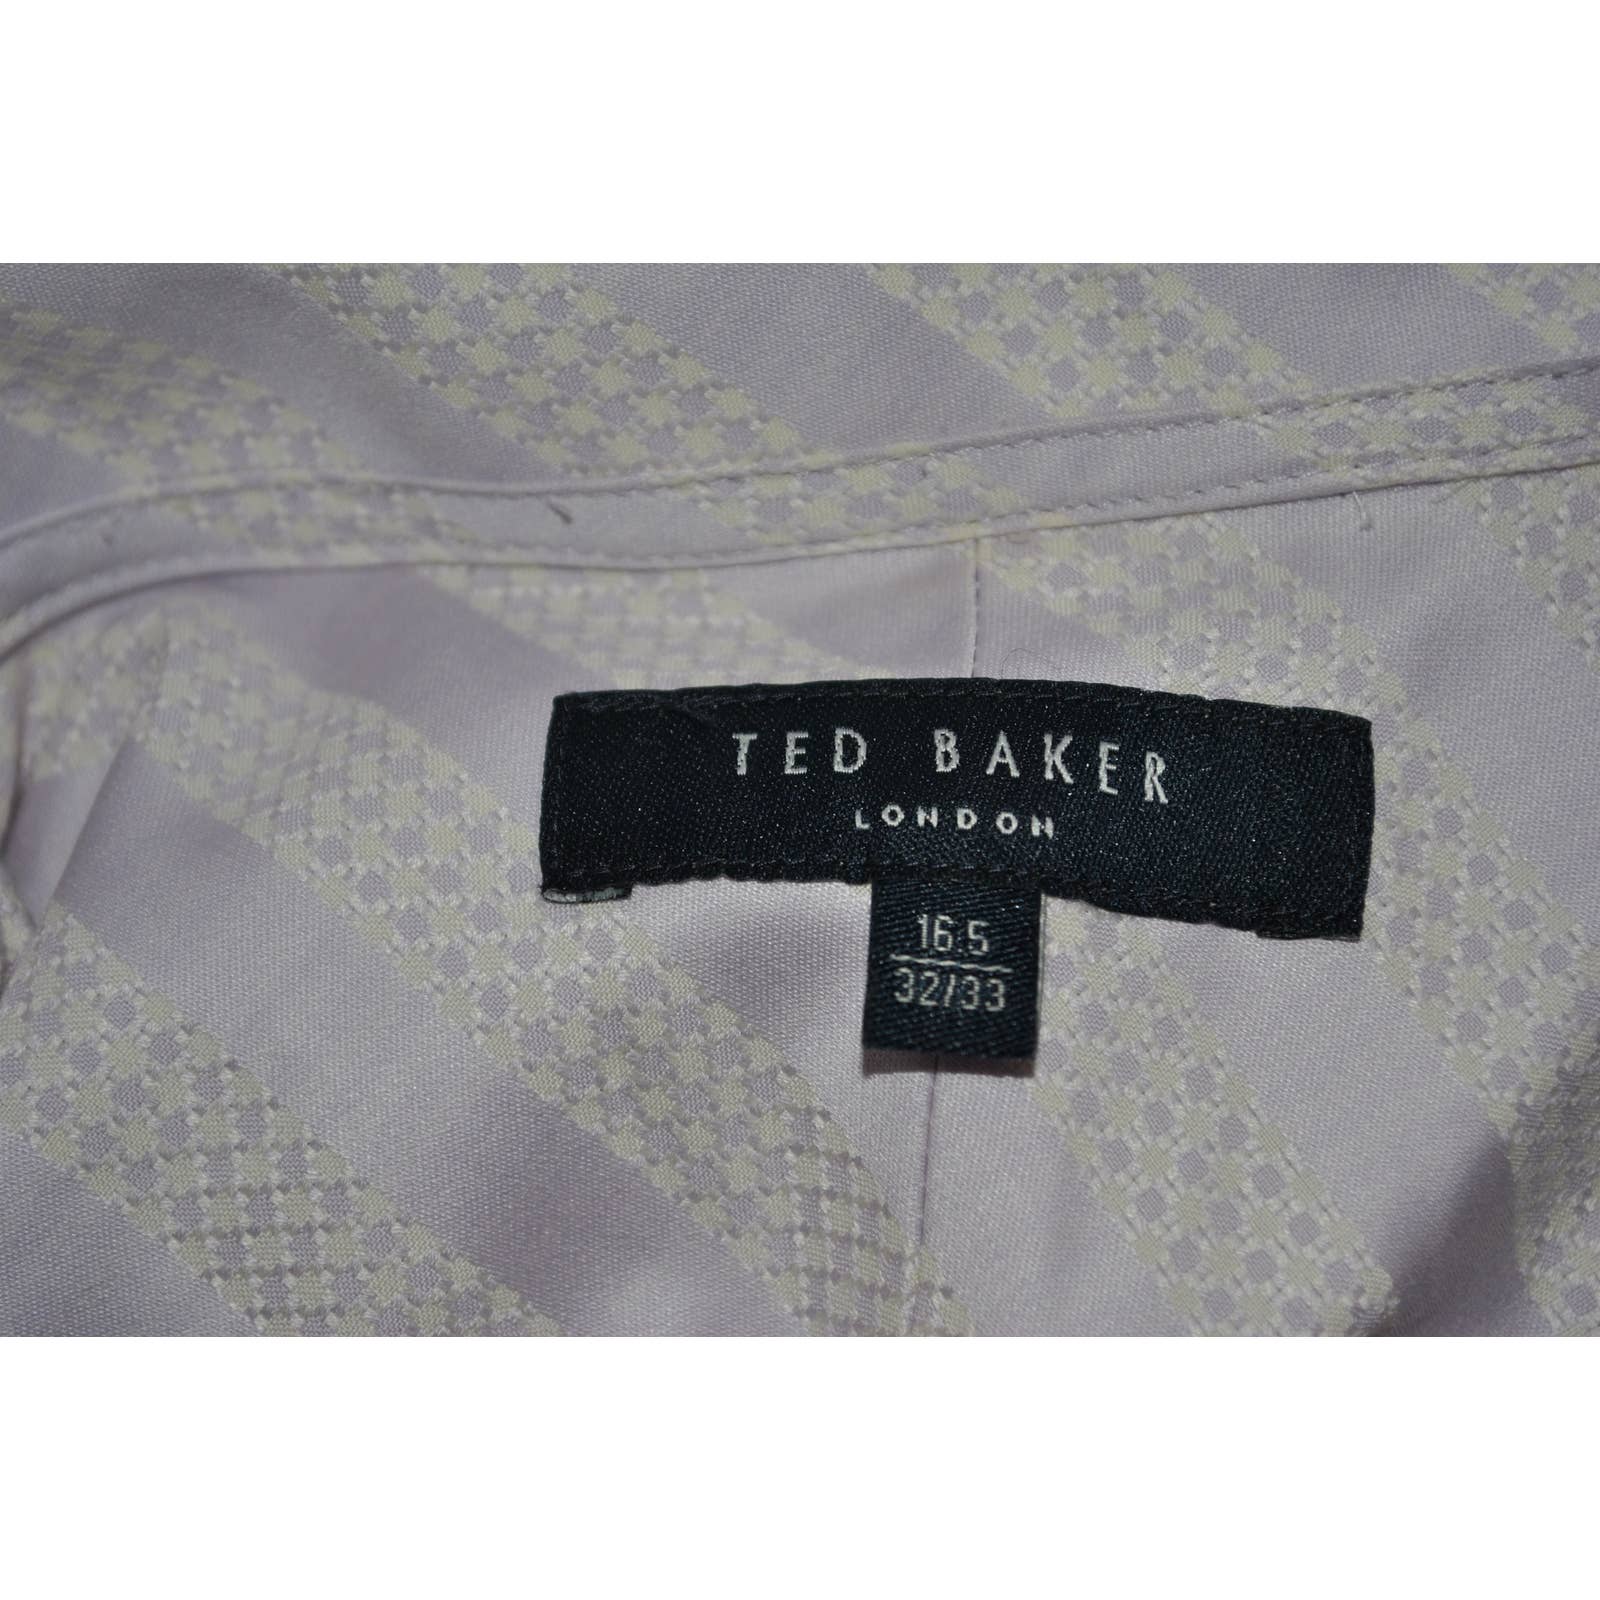 Ted Baker Lavender White French Cuff Button Up Shirt - 16.5 32/33